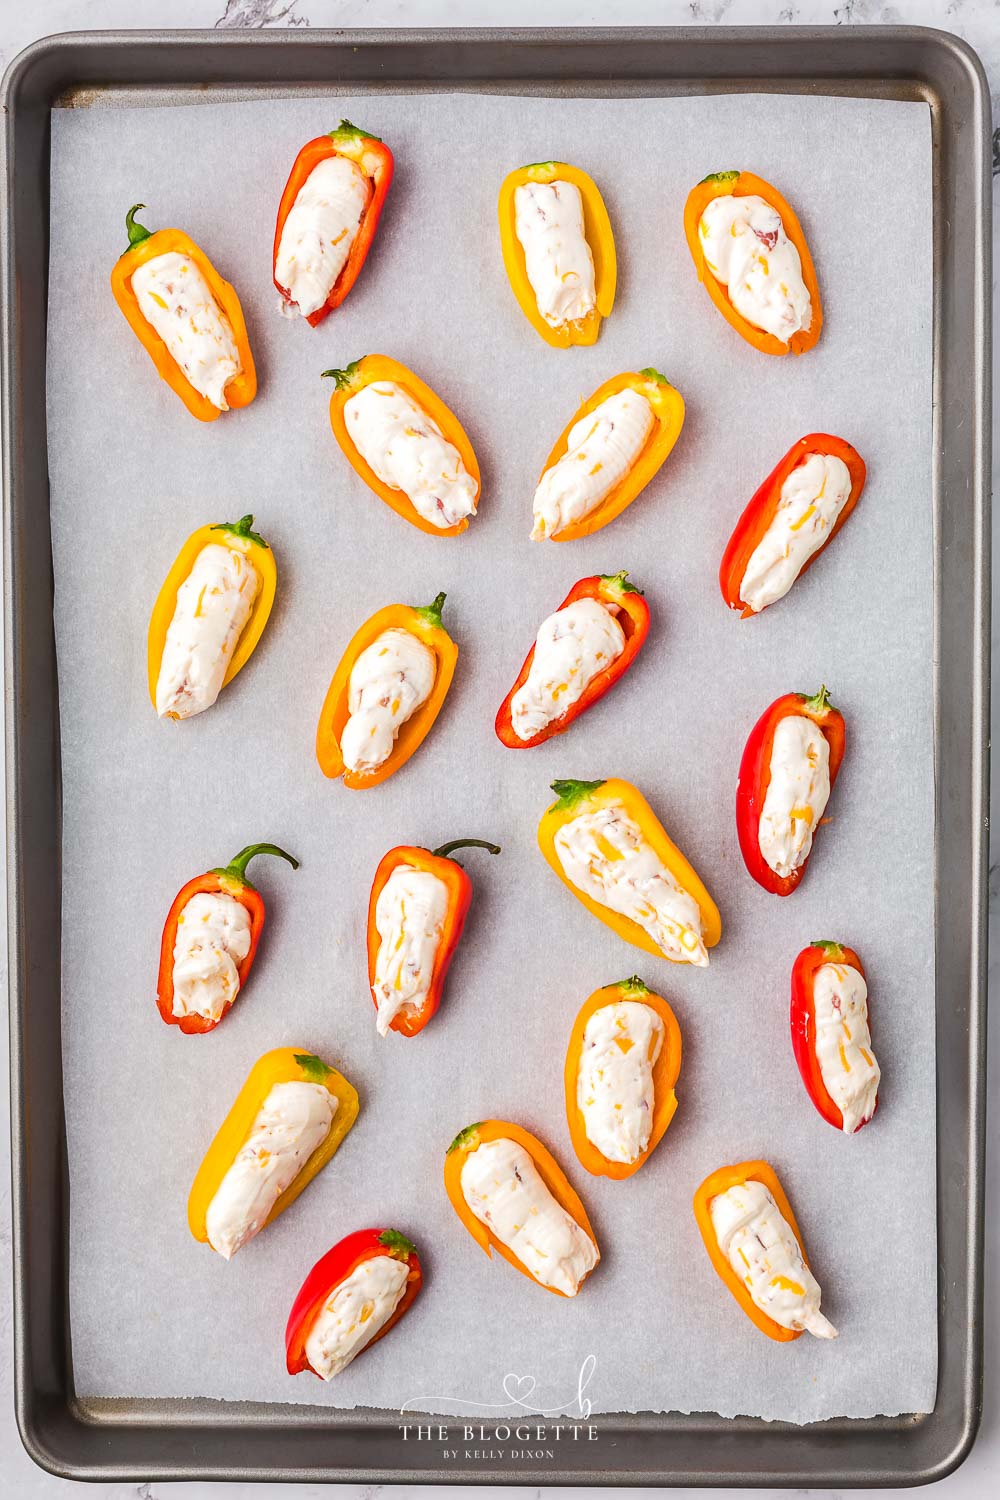 Peppers with cheese mixture